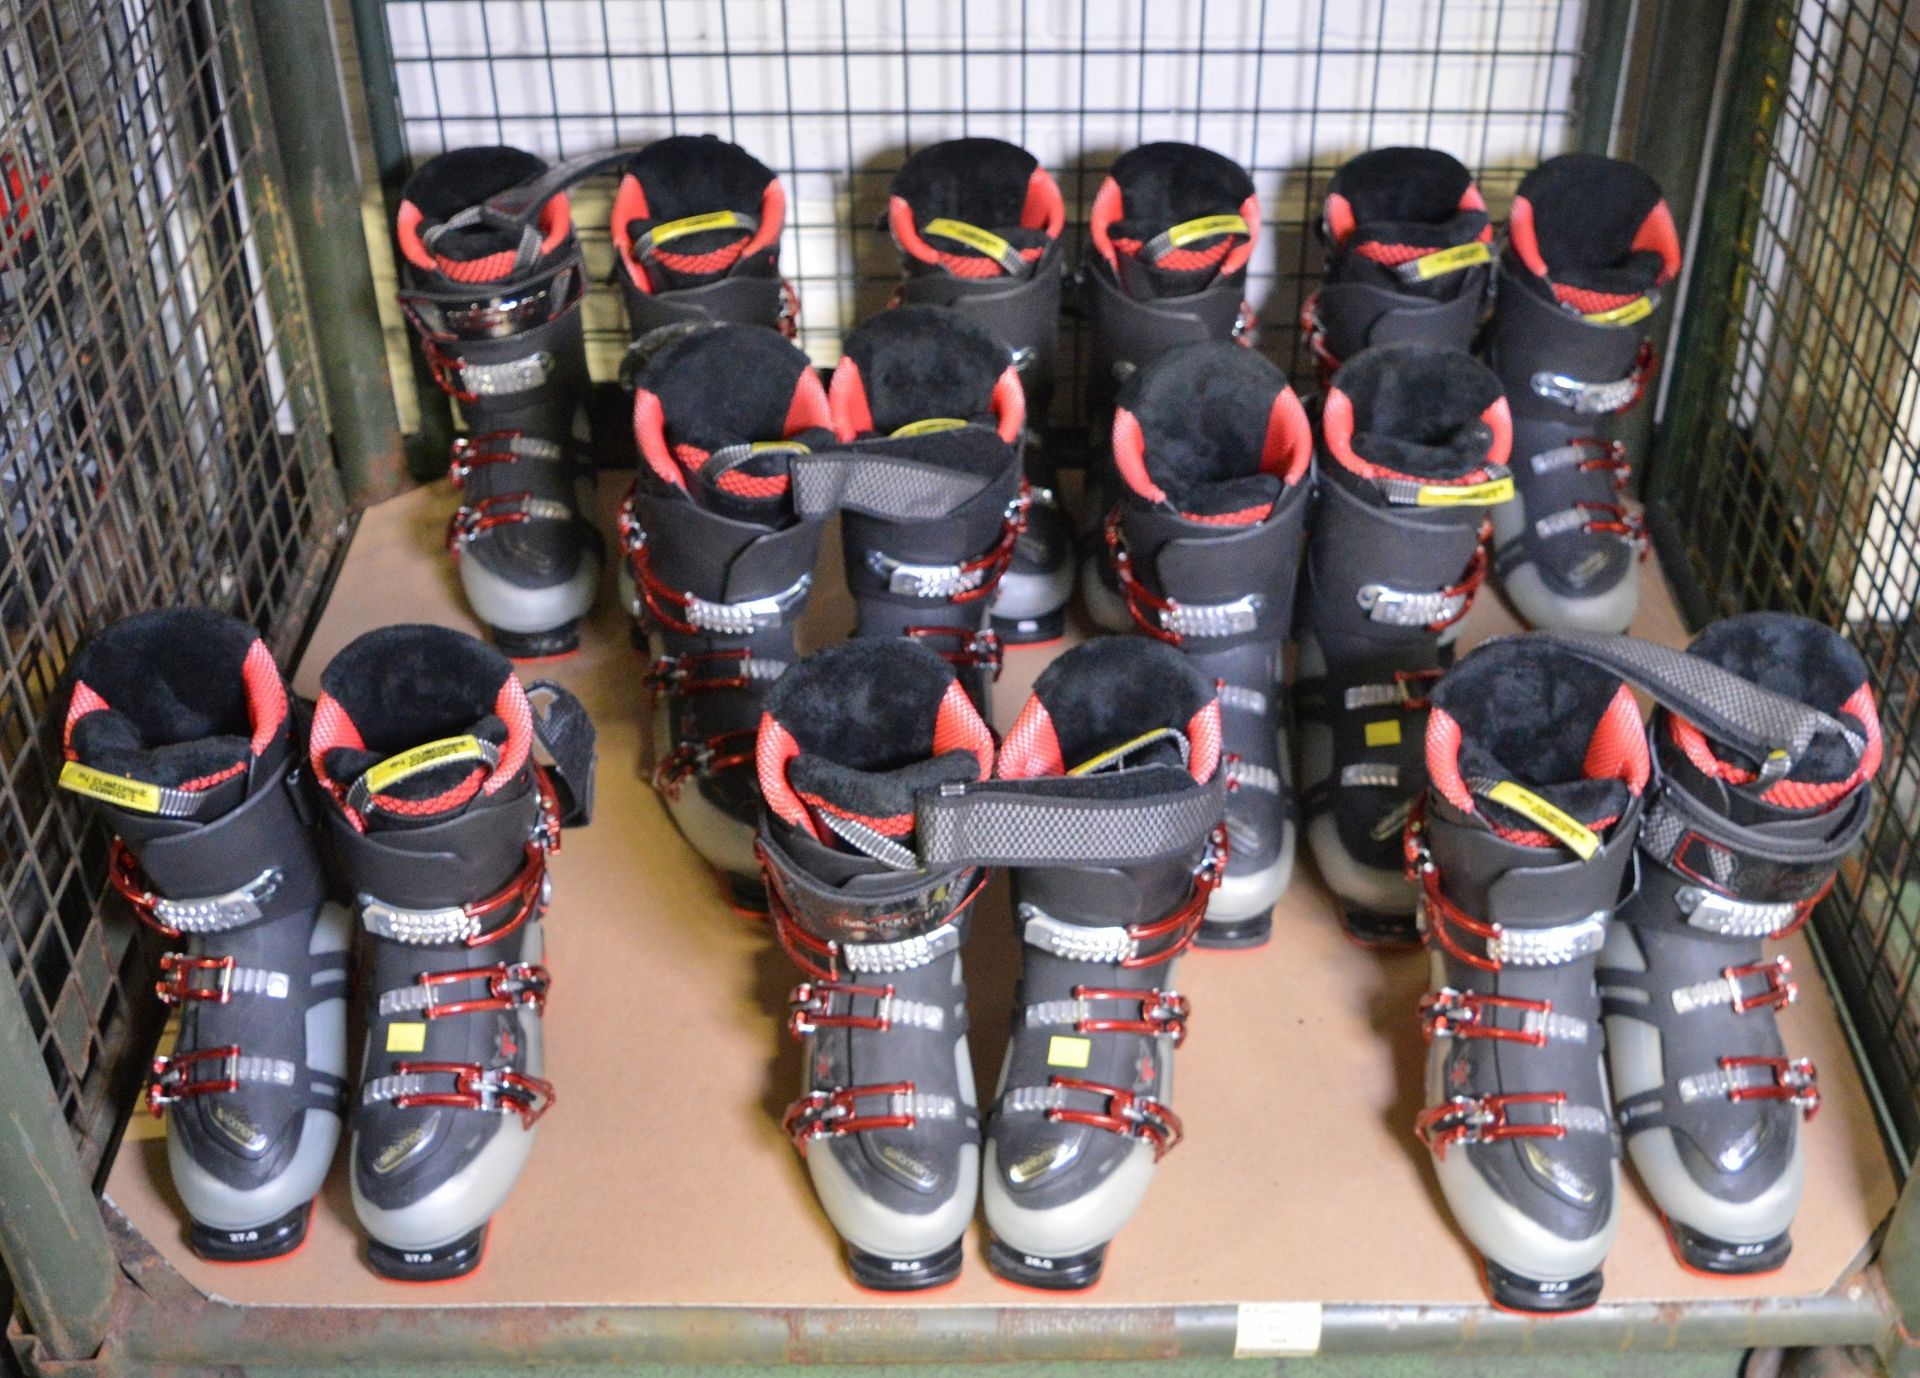 8x Pairs of Ski Boots - various makes & sizes